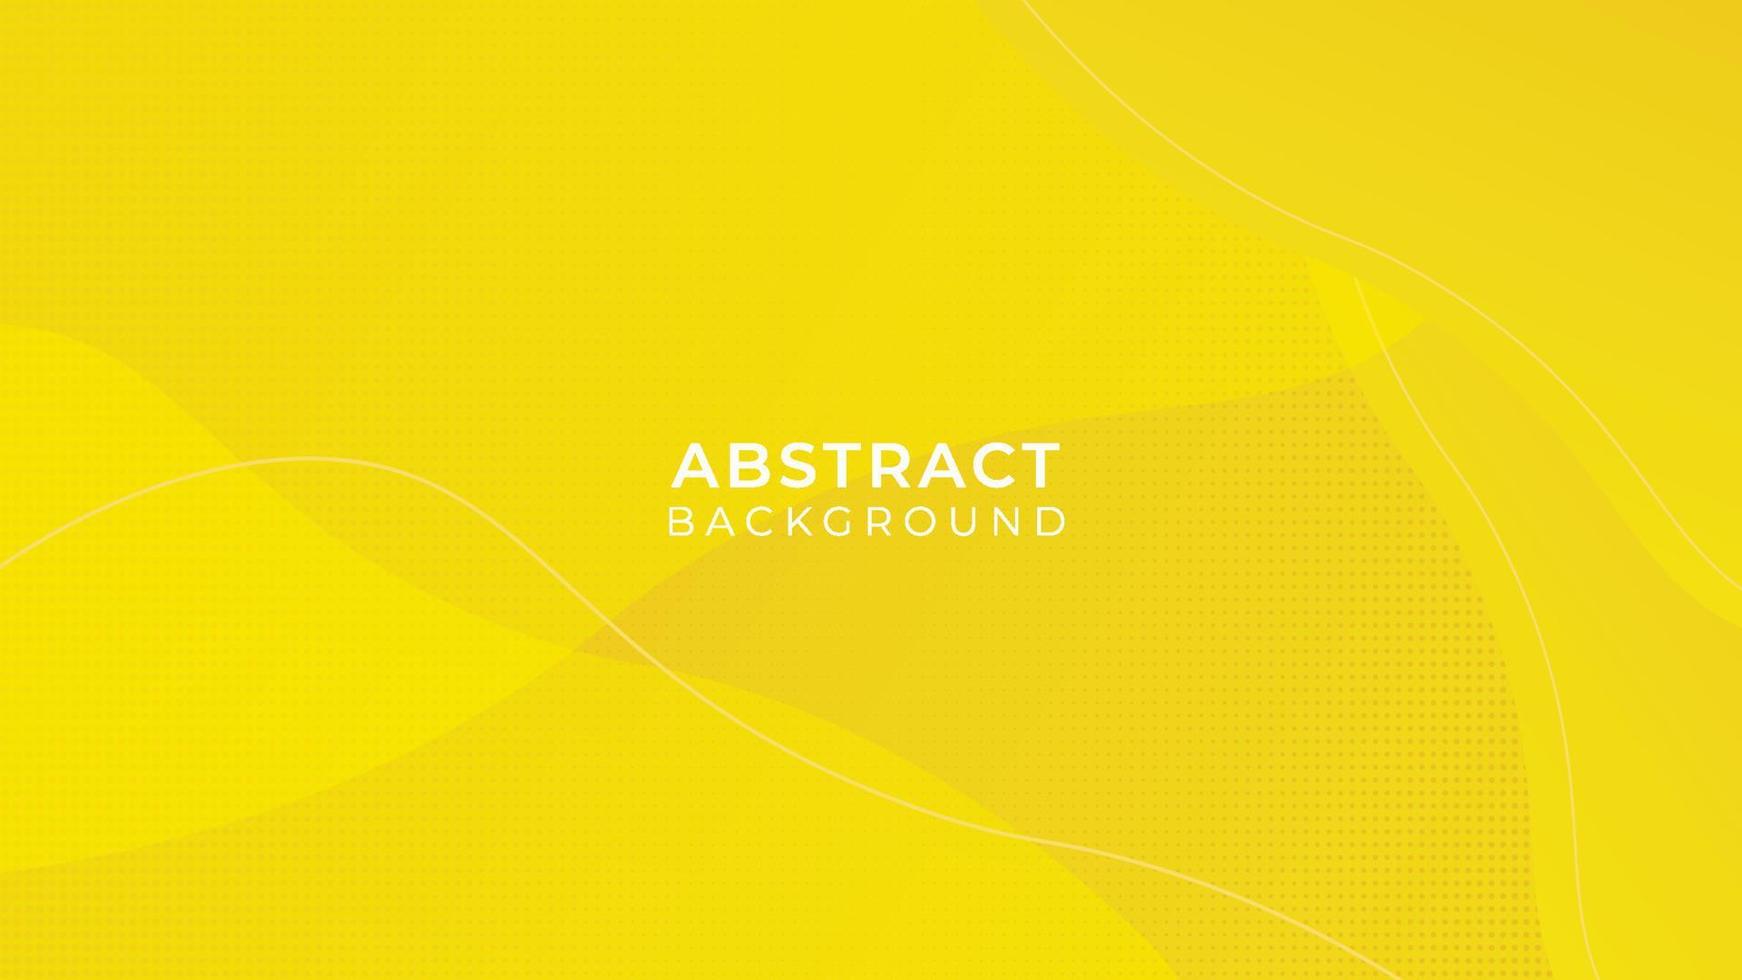 Abstract minimal modern background. Fluid gradient shapes composition. Vector illustration